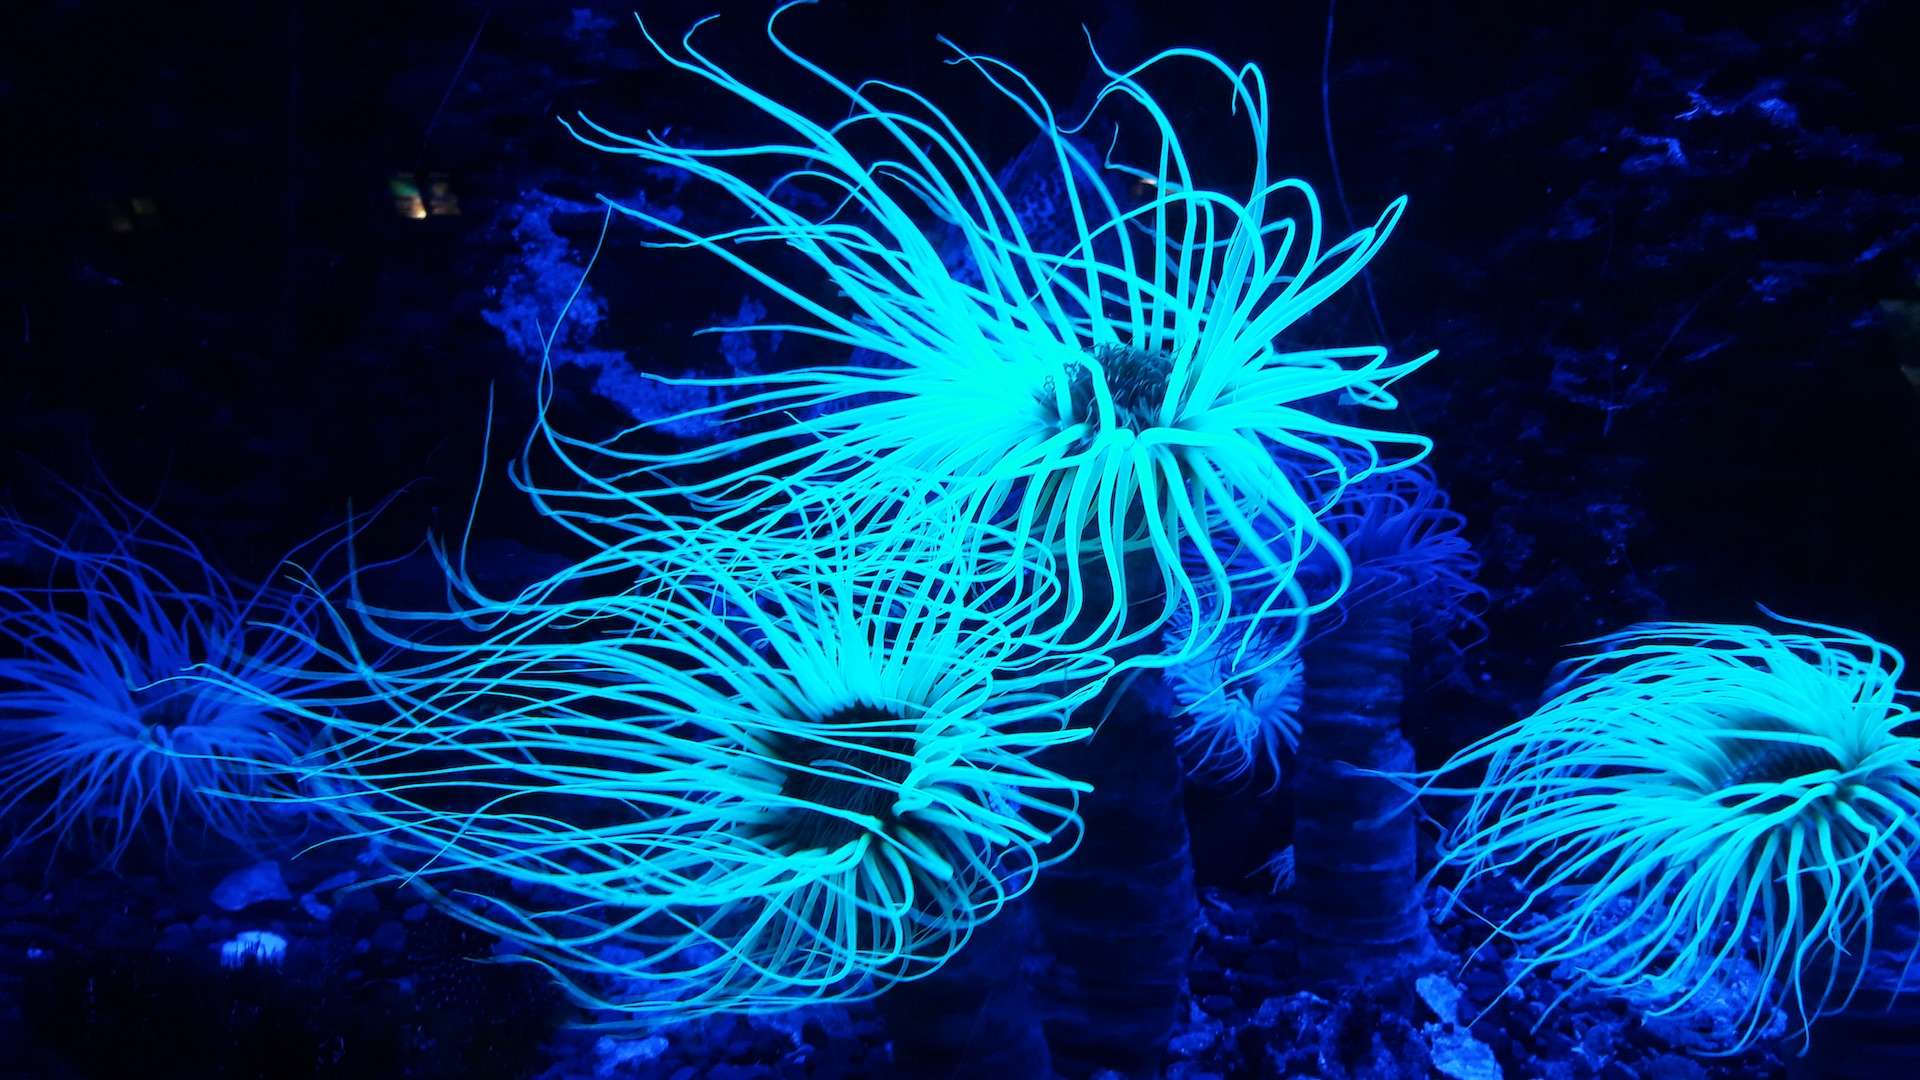 Coral reef bioluminescent plante of the ocean